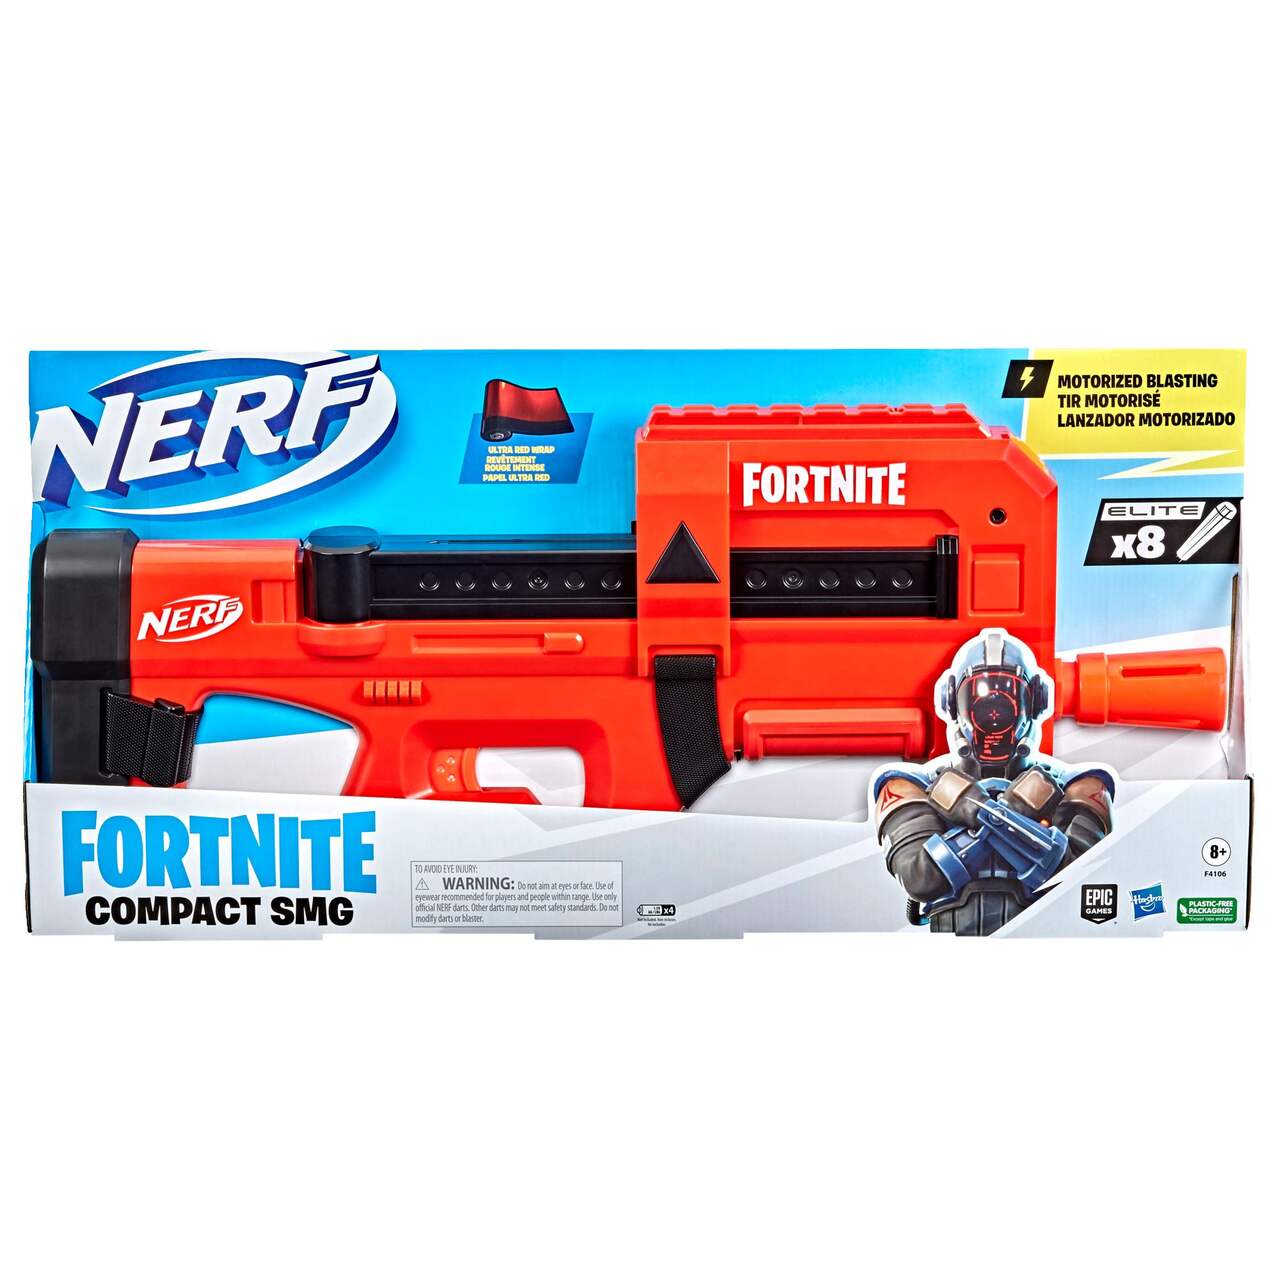 NERF Fortnite Compact SMG Blaster, Ages 8+